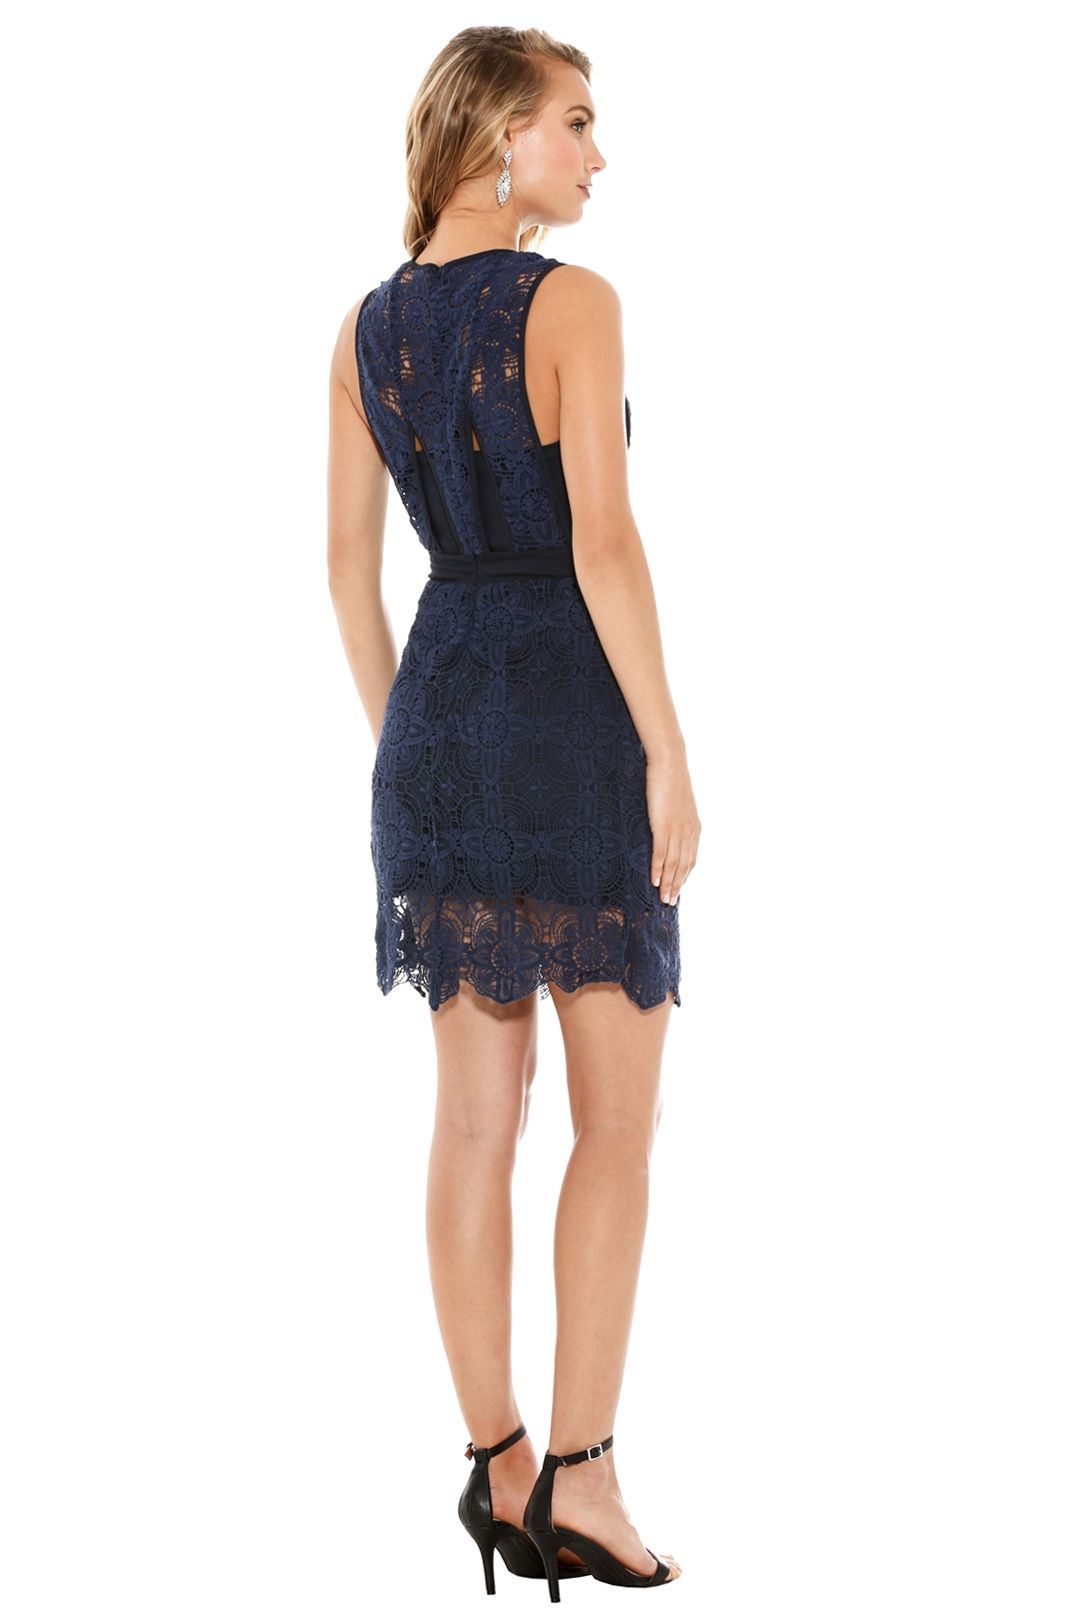 Fame And Partners - Midnight Fling Dress - Blue - Back